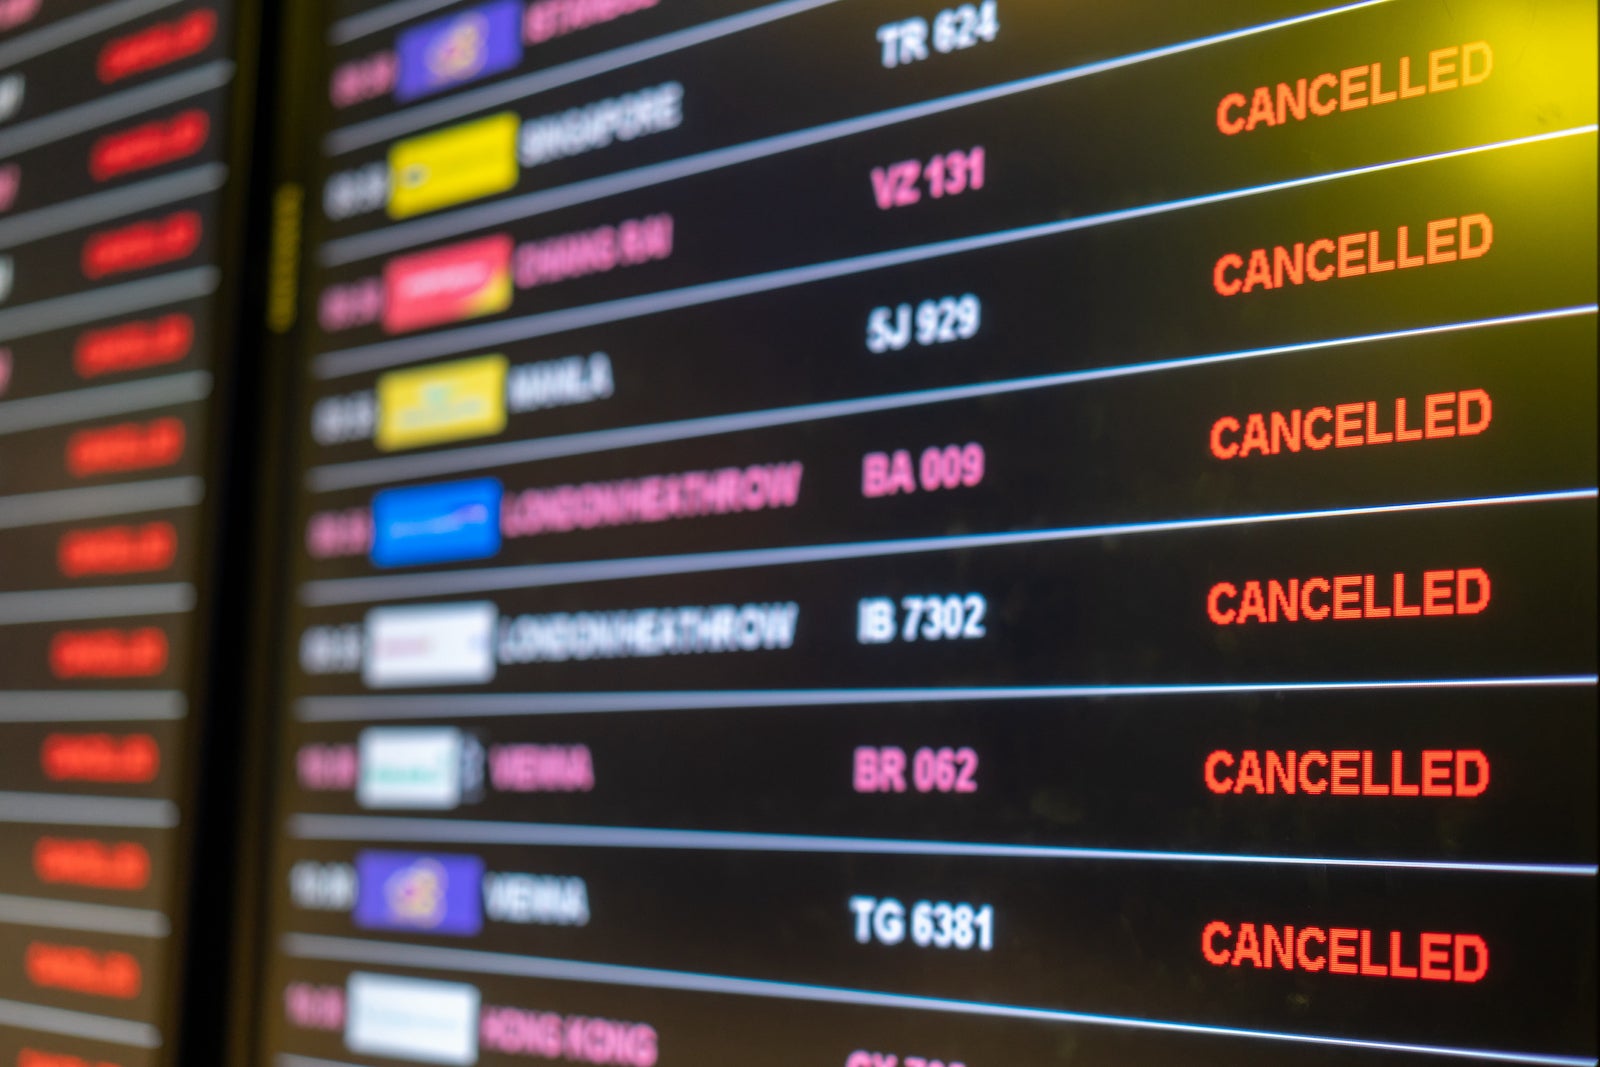 What you can ask from an airline after a delayed or canceled flight